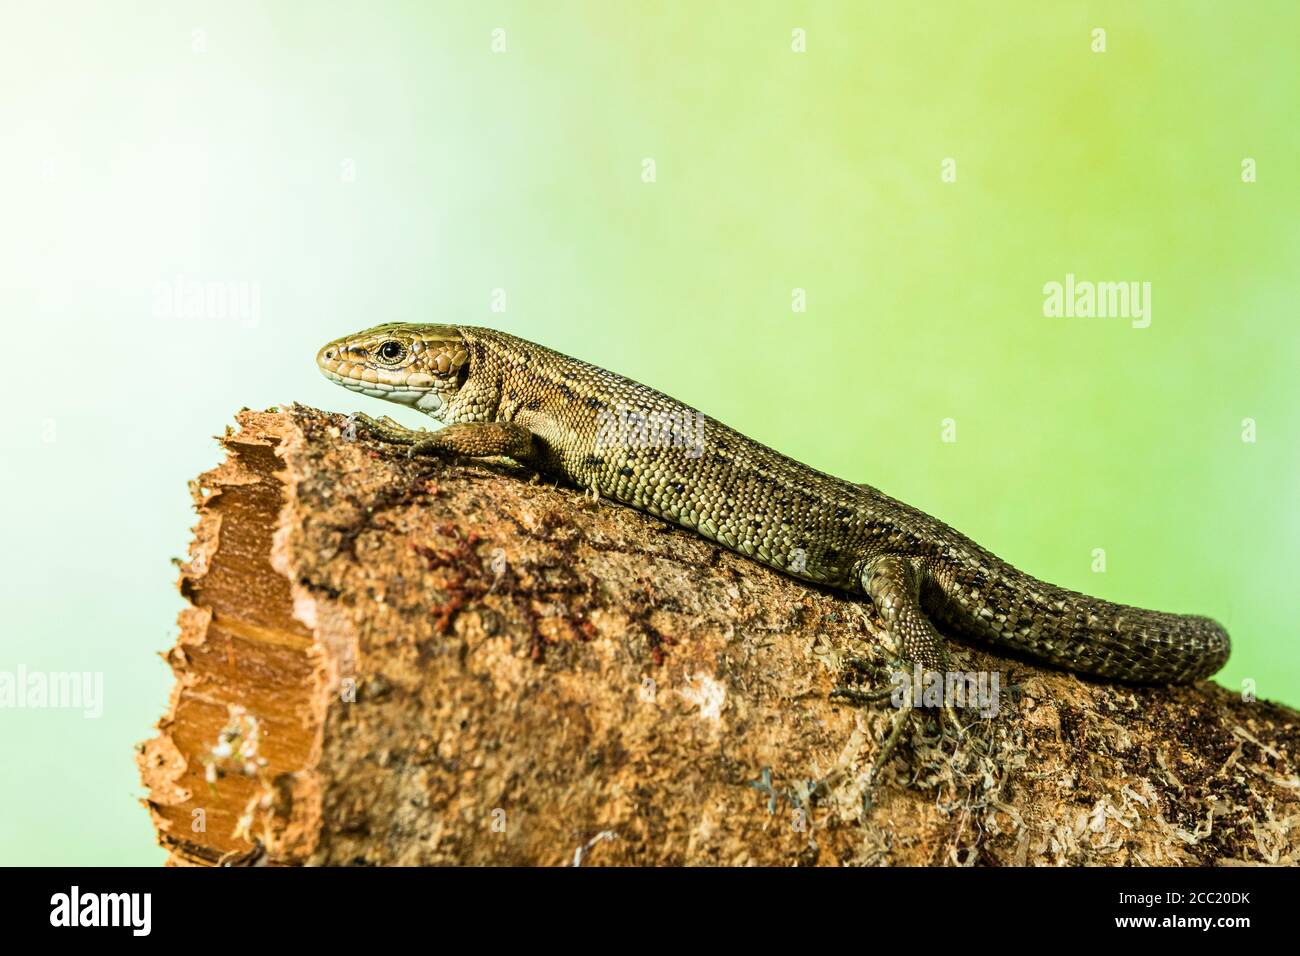 A common lizard photographed in controlled circumstances and released unharmed Stock Photo